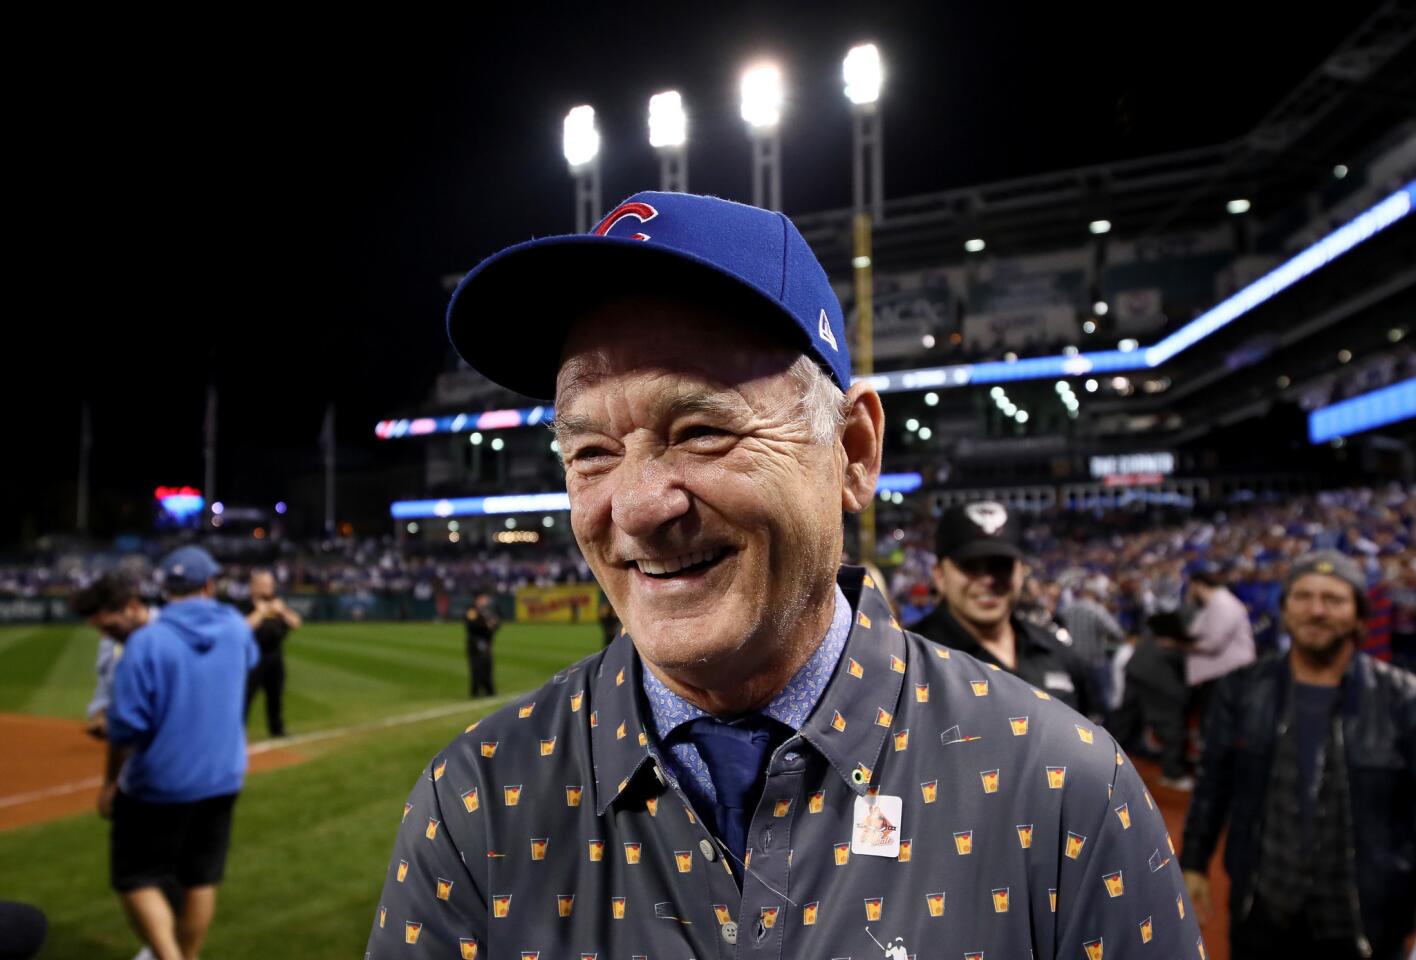 Bill Murray wears a William Murray Golf short bearing the "Old Fashioned"design on the field after the Chicago Cubs defeated the Cleveland Indians 8-7 in Game Seven of the 2016 World Series at Progressive Field on November 2, 2016 in Cleveland, Ohio.